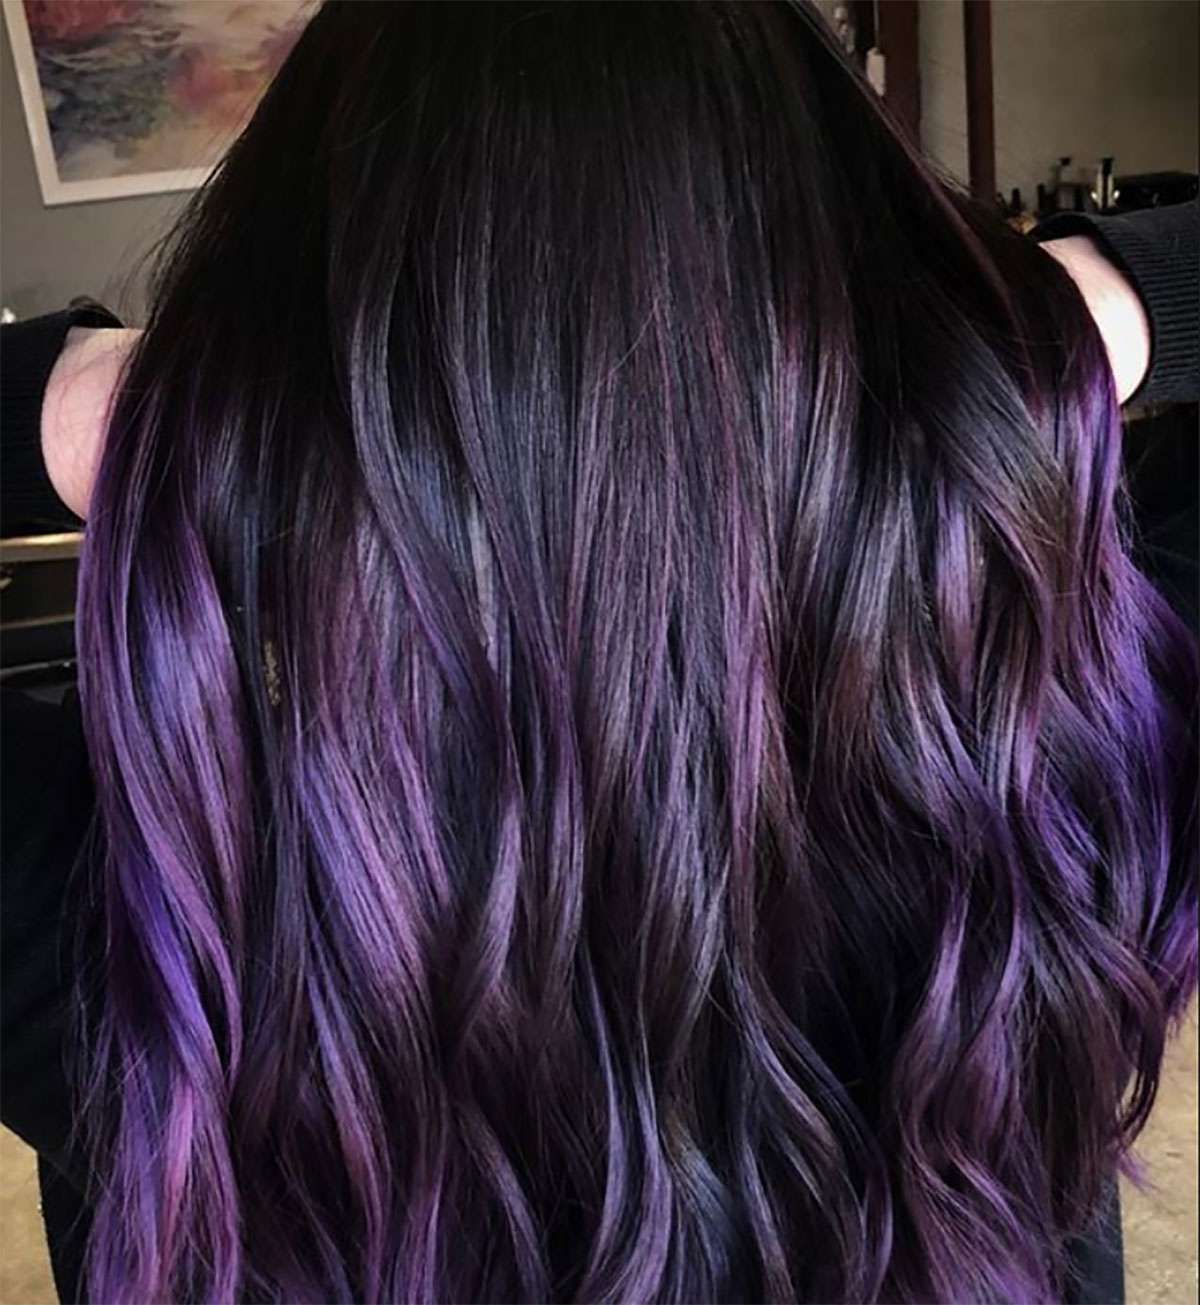 Blackberry Dark Purple Hair Color Trend Instyle,What A Beautiful Name Kids Book